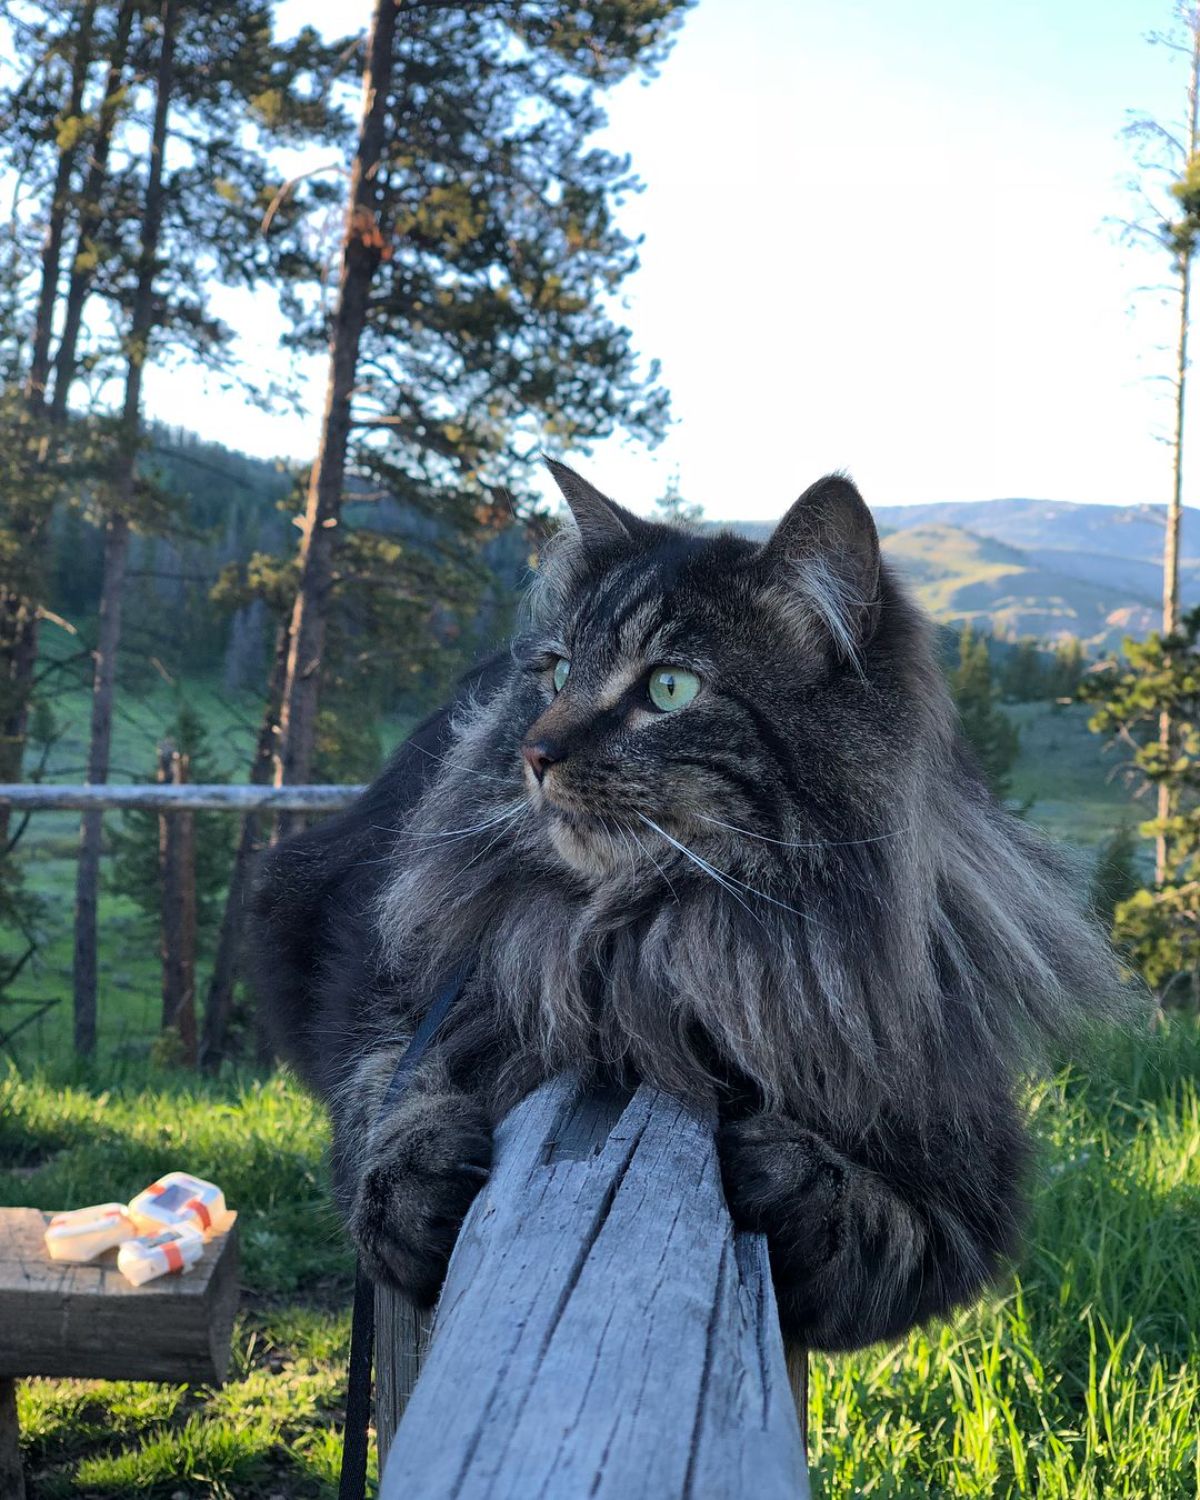 Otie the Maine Coon laying on a wooden pole in mountains.